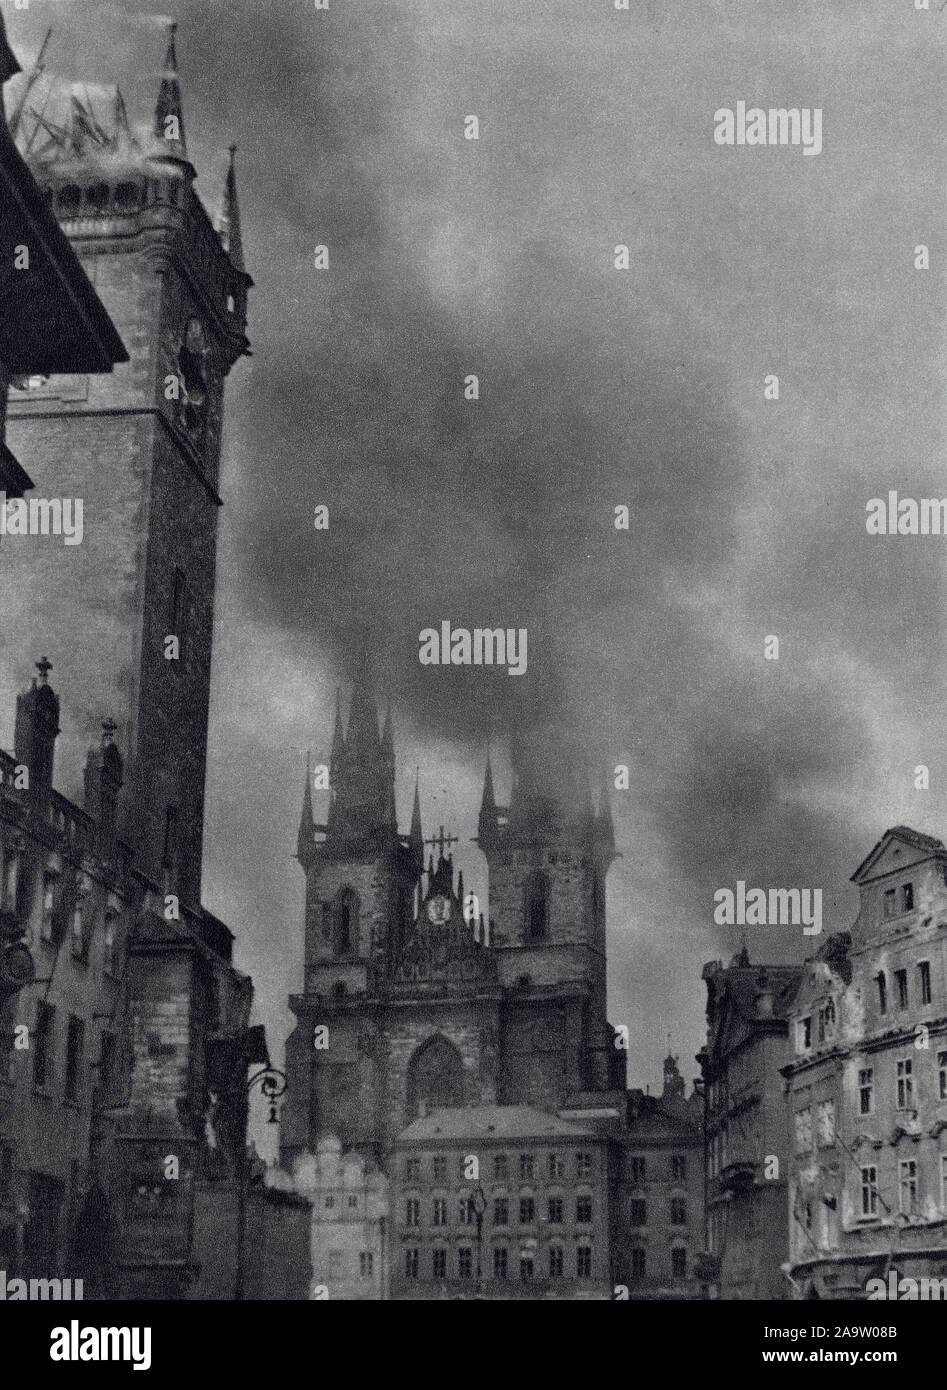 Fire on the medieval tower of the Old Town Hall (Staroměstská radnice) in Old Town Square (Staroměstské náměstí) in Prague, Czechoslovakia, during the Prague Uprising in the last days of World War II in May 1945. Black and white photograph by Czech photographer Oldřich Smola taken probably on 8 May 1945 and published in the Czechoslovak book 'The Heart of Prague on Fire' ('Srdce Prahy v plamenech') issued in 1946. Courtesy of the Azoor Postcard Collection. Stock Photo